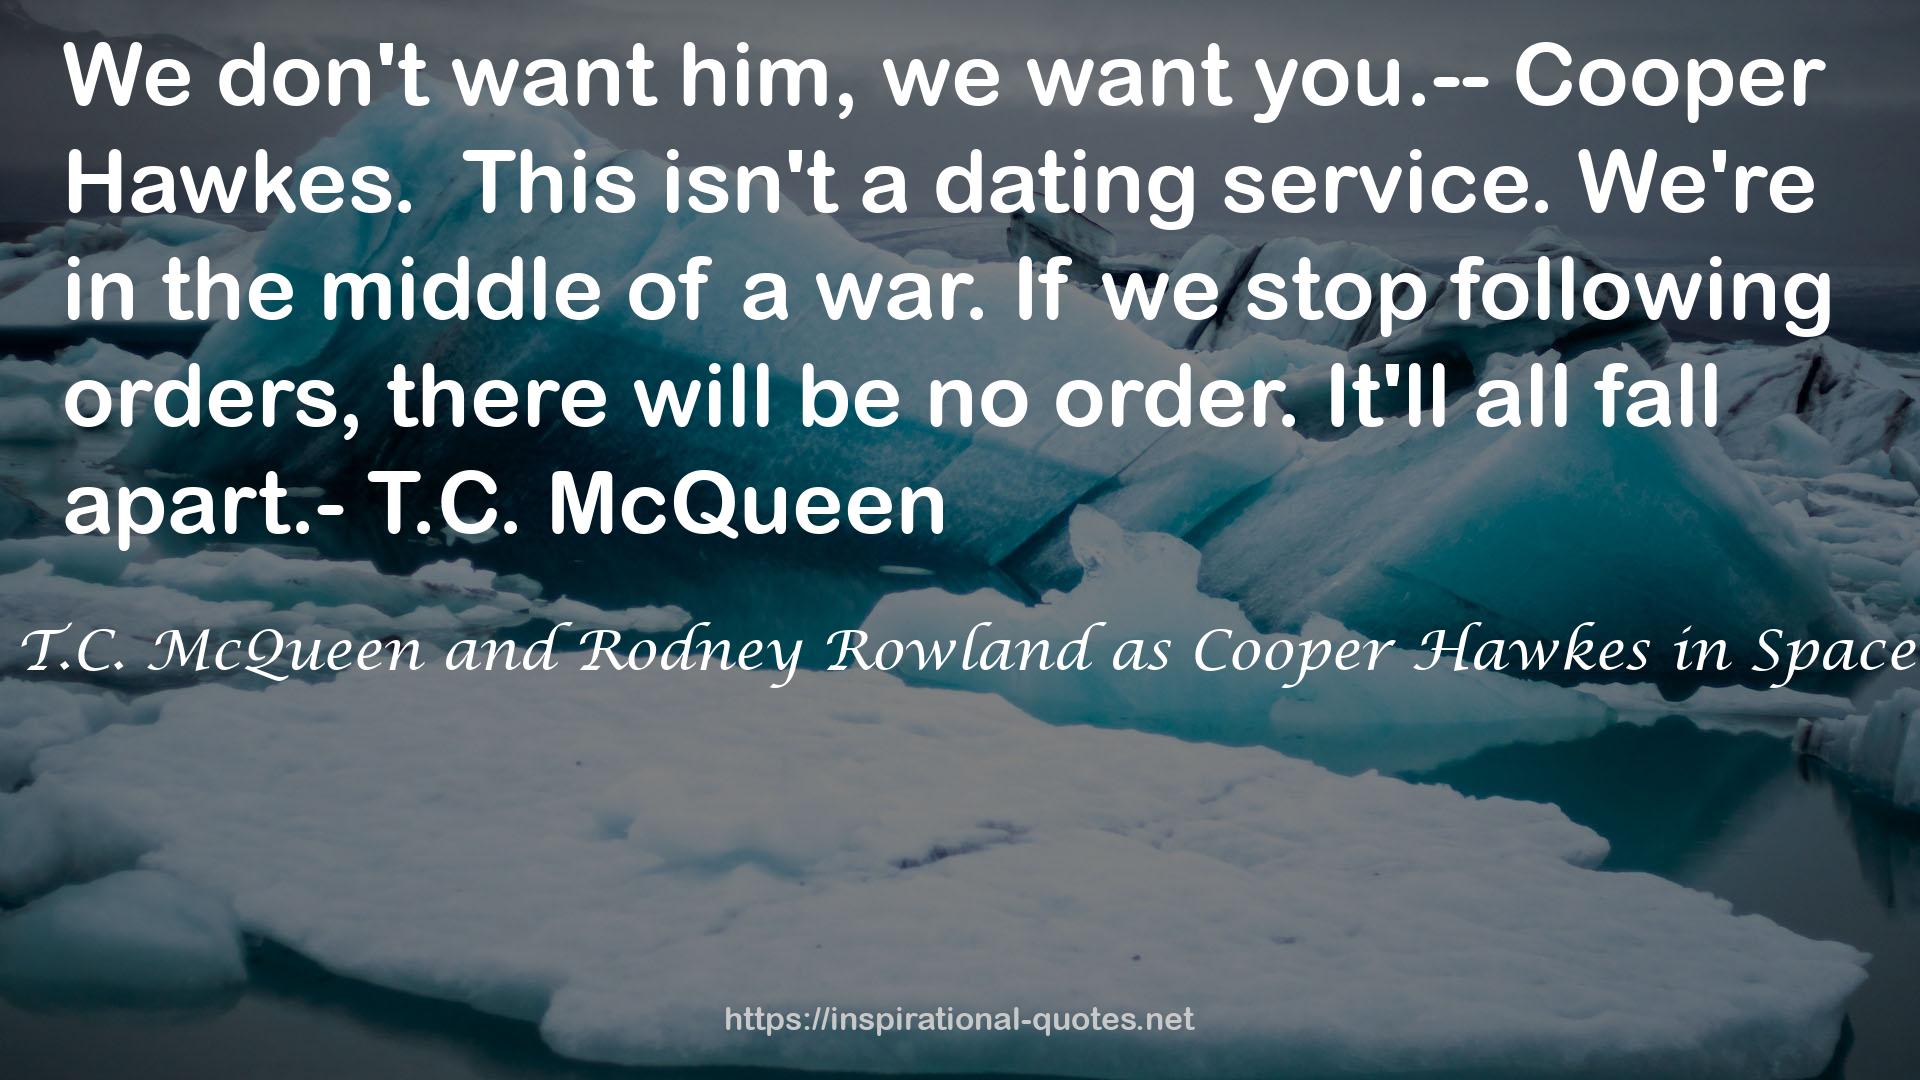 James Morrison as T.C. McQueen and Rodney Rowland as Cooper Hawkes in Space Above and Beyond QUOTES